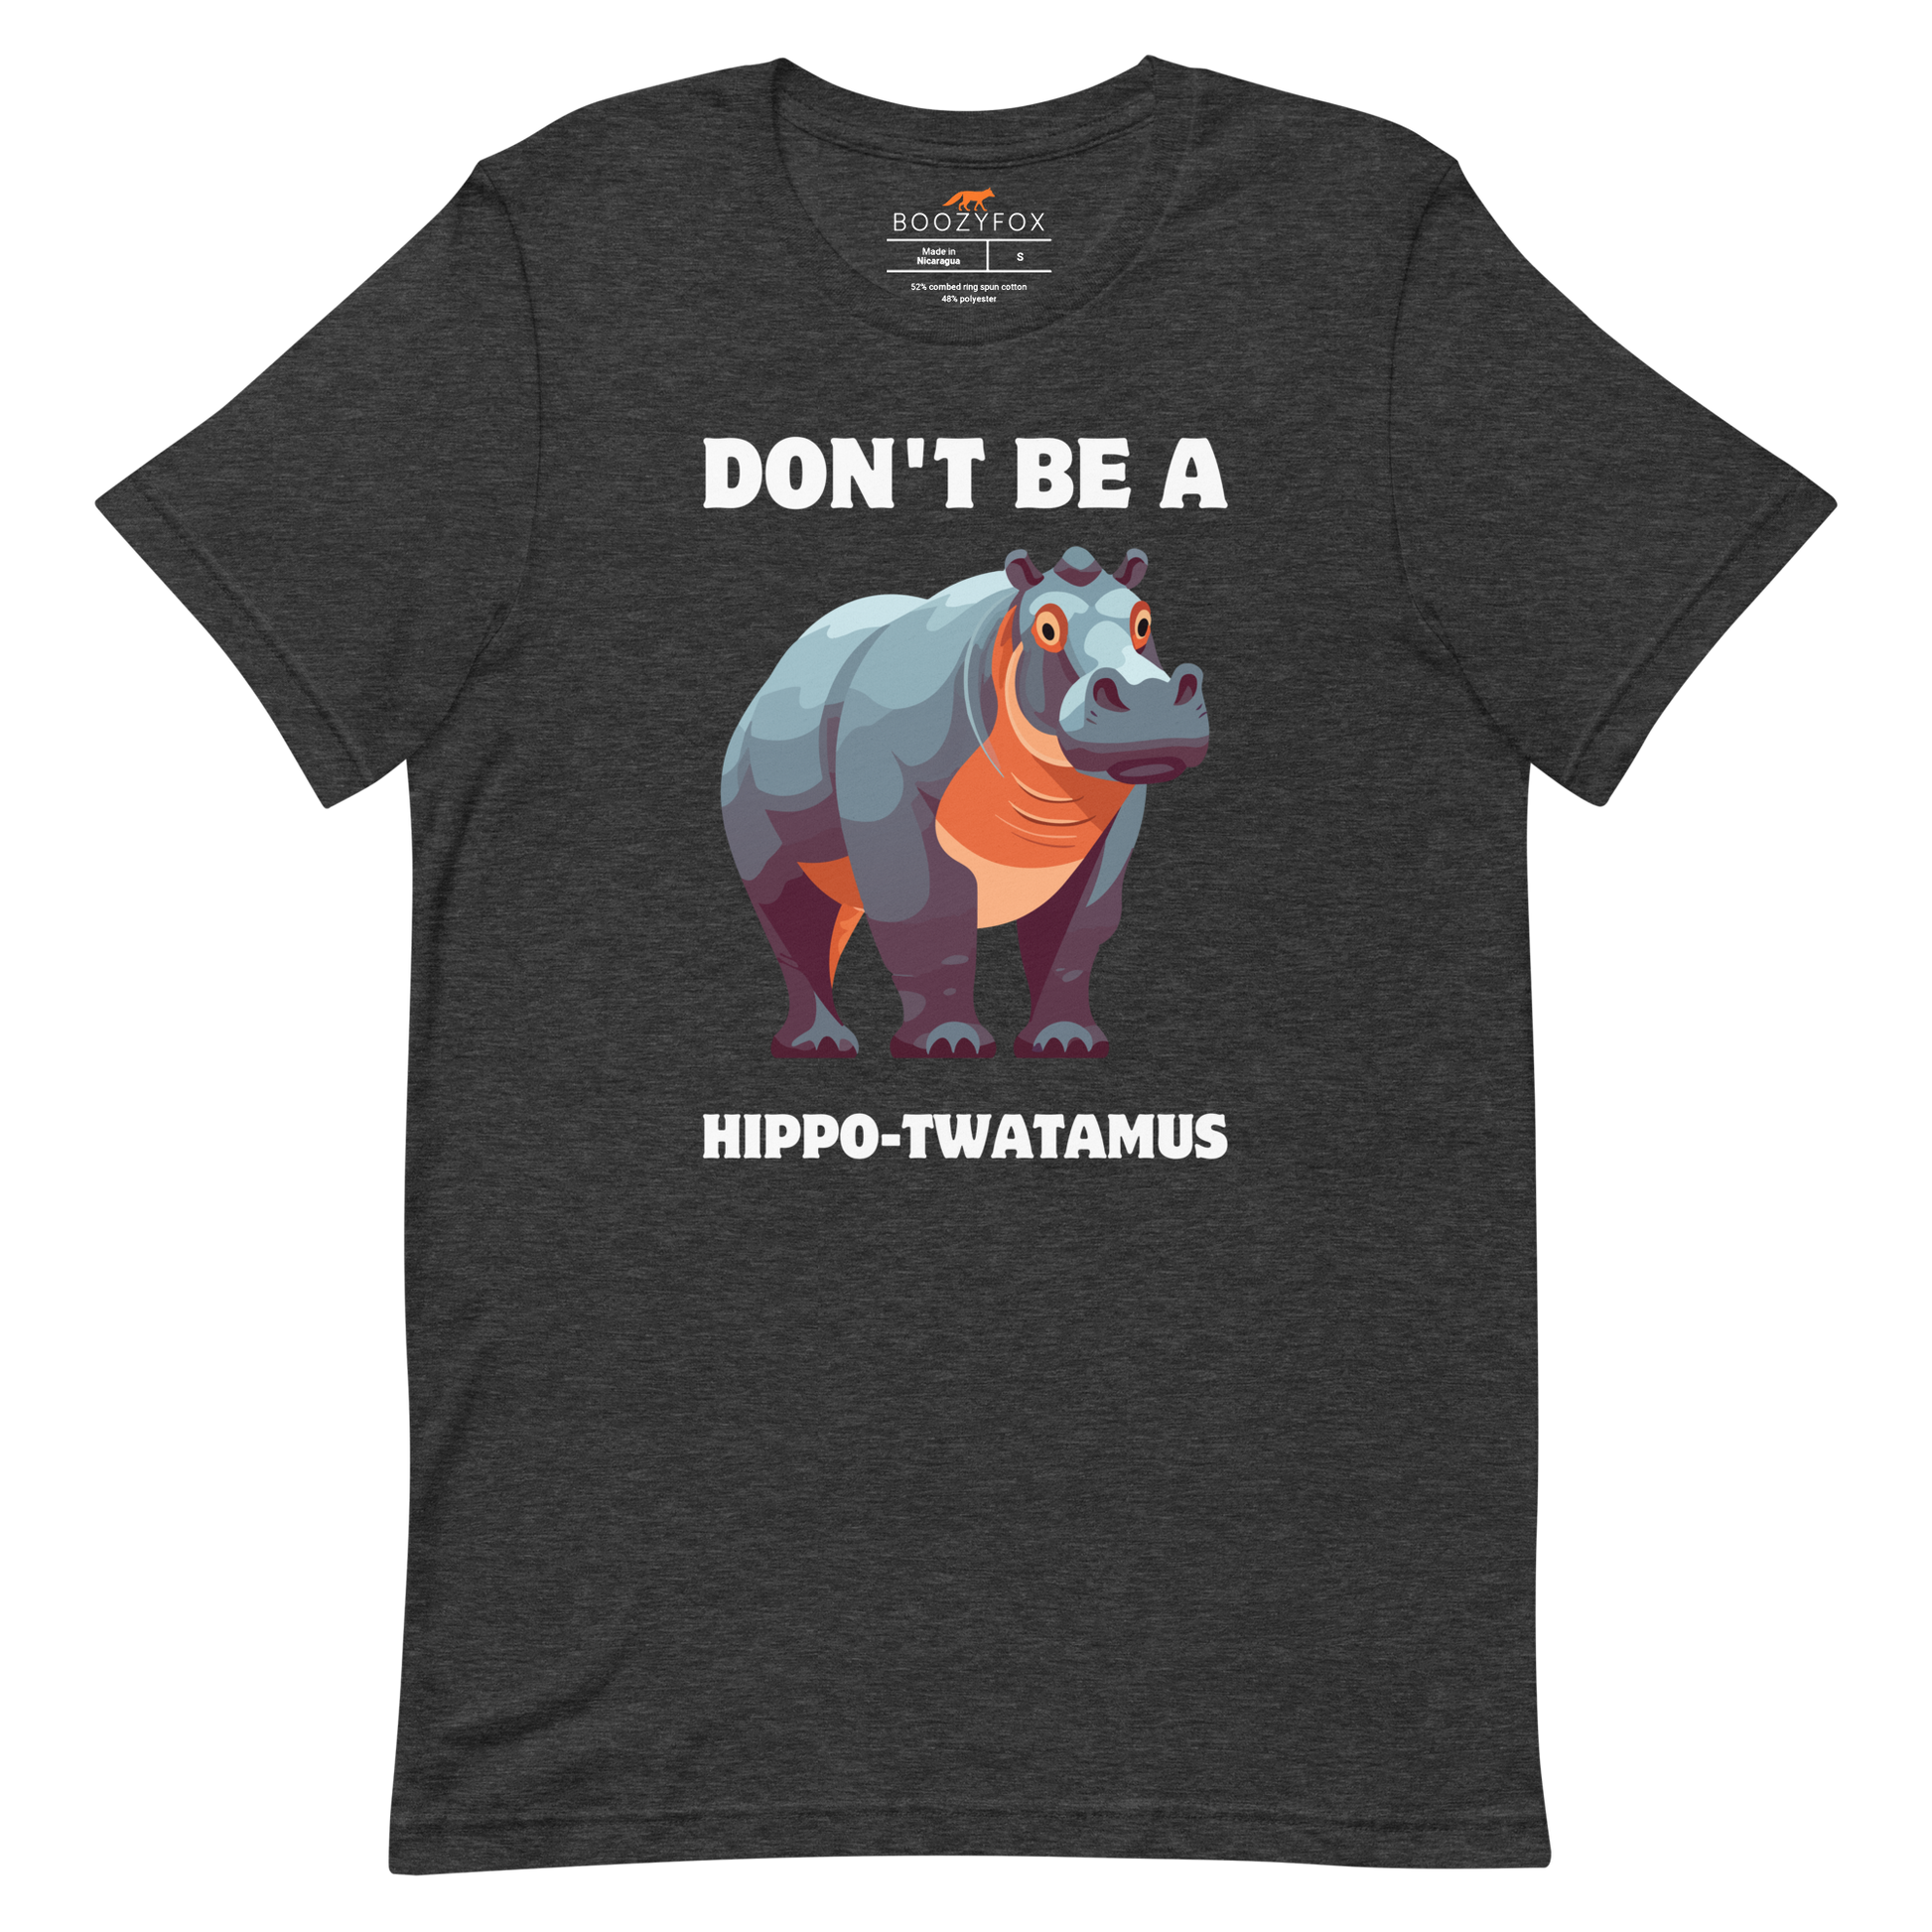 Dark Grey Heather Premium Hippo Tee featuring a Don't Be a Hippo-Twatamus graphic on the chest - Funny Graphic Hippo Tees - Boozy Fox